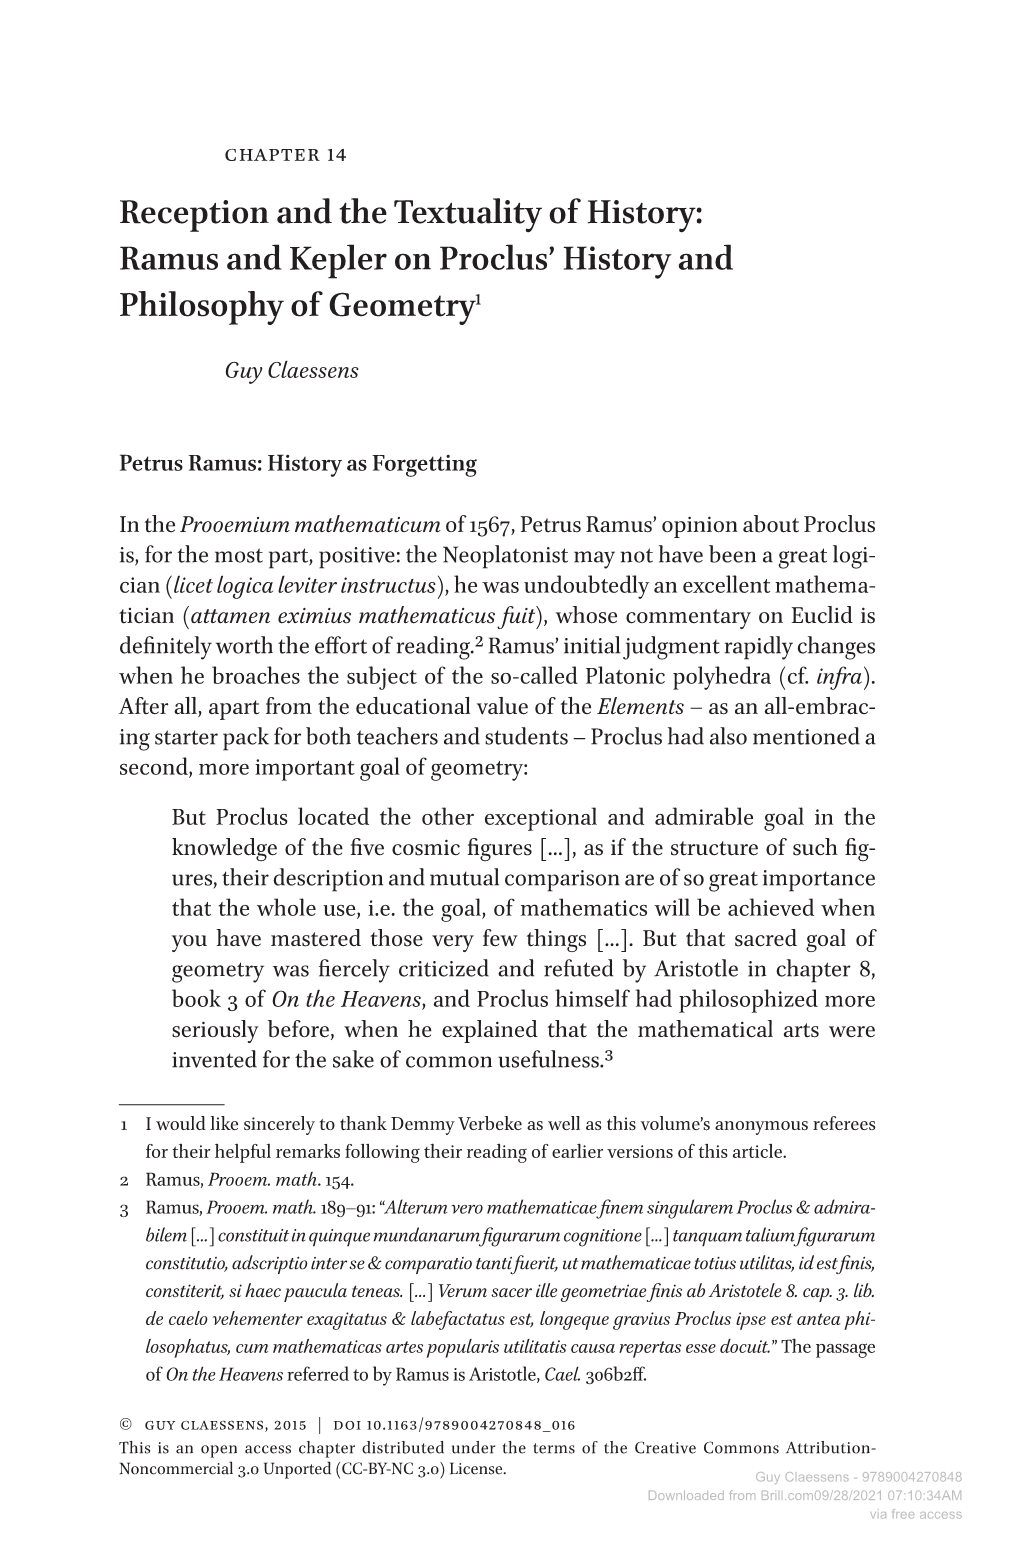 Ramus and Kepler on Proclus' History and Philosophy of Geometry1